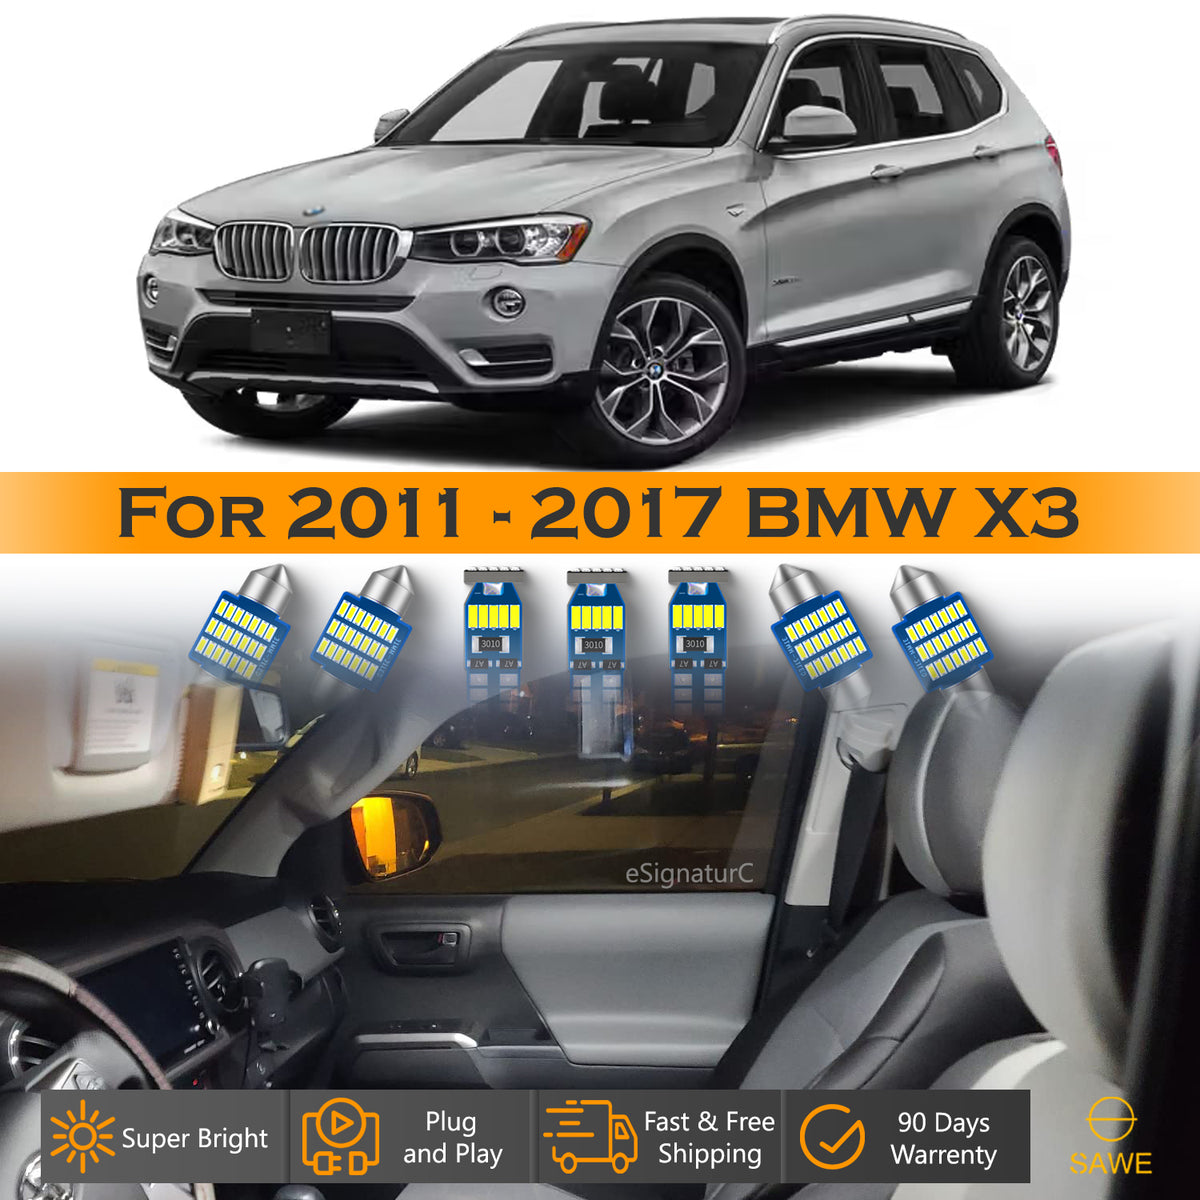 For BMW X3 F25 Interior LED Lights - Dome & Map Light Bulb Package Kit for 2011 - 2017 - White